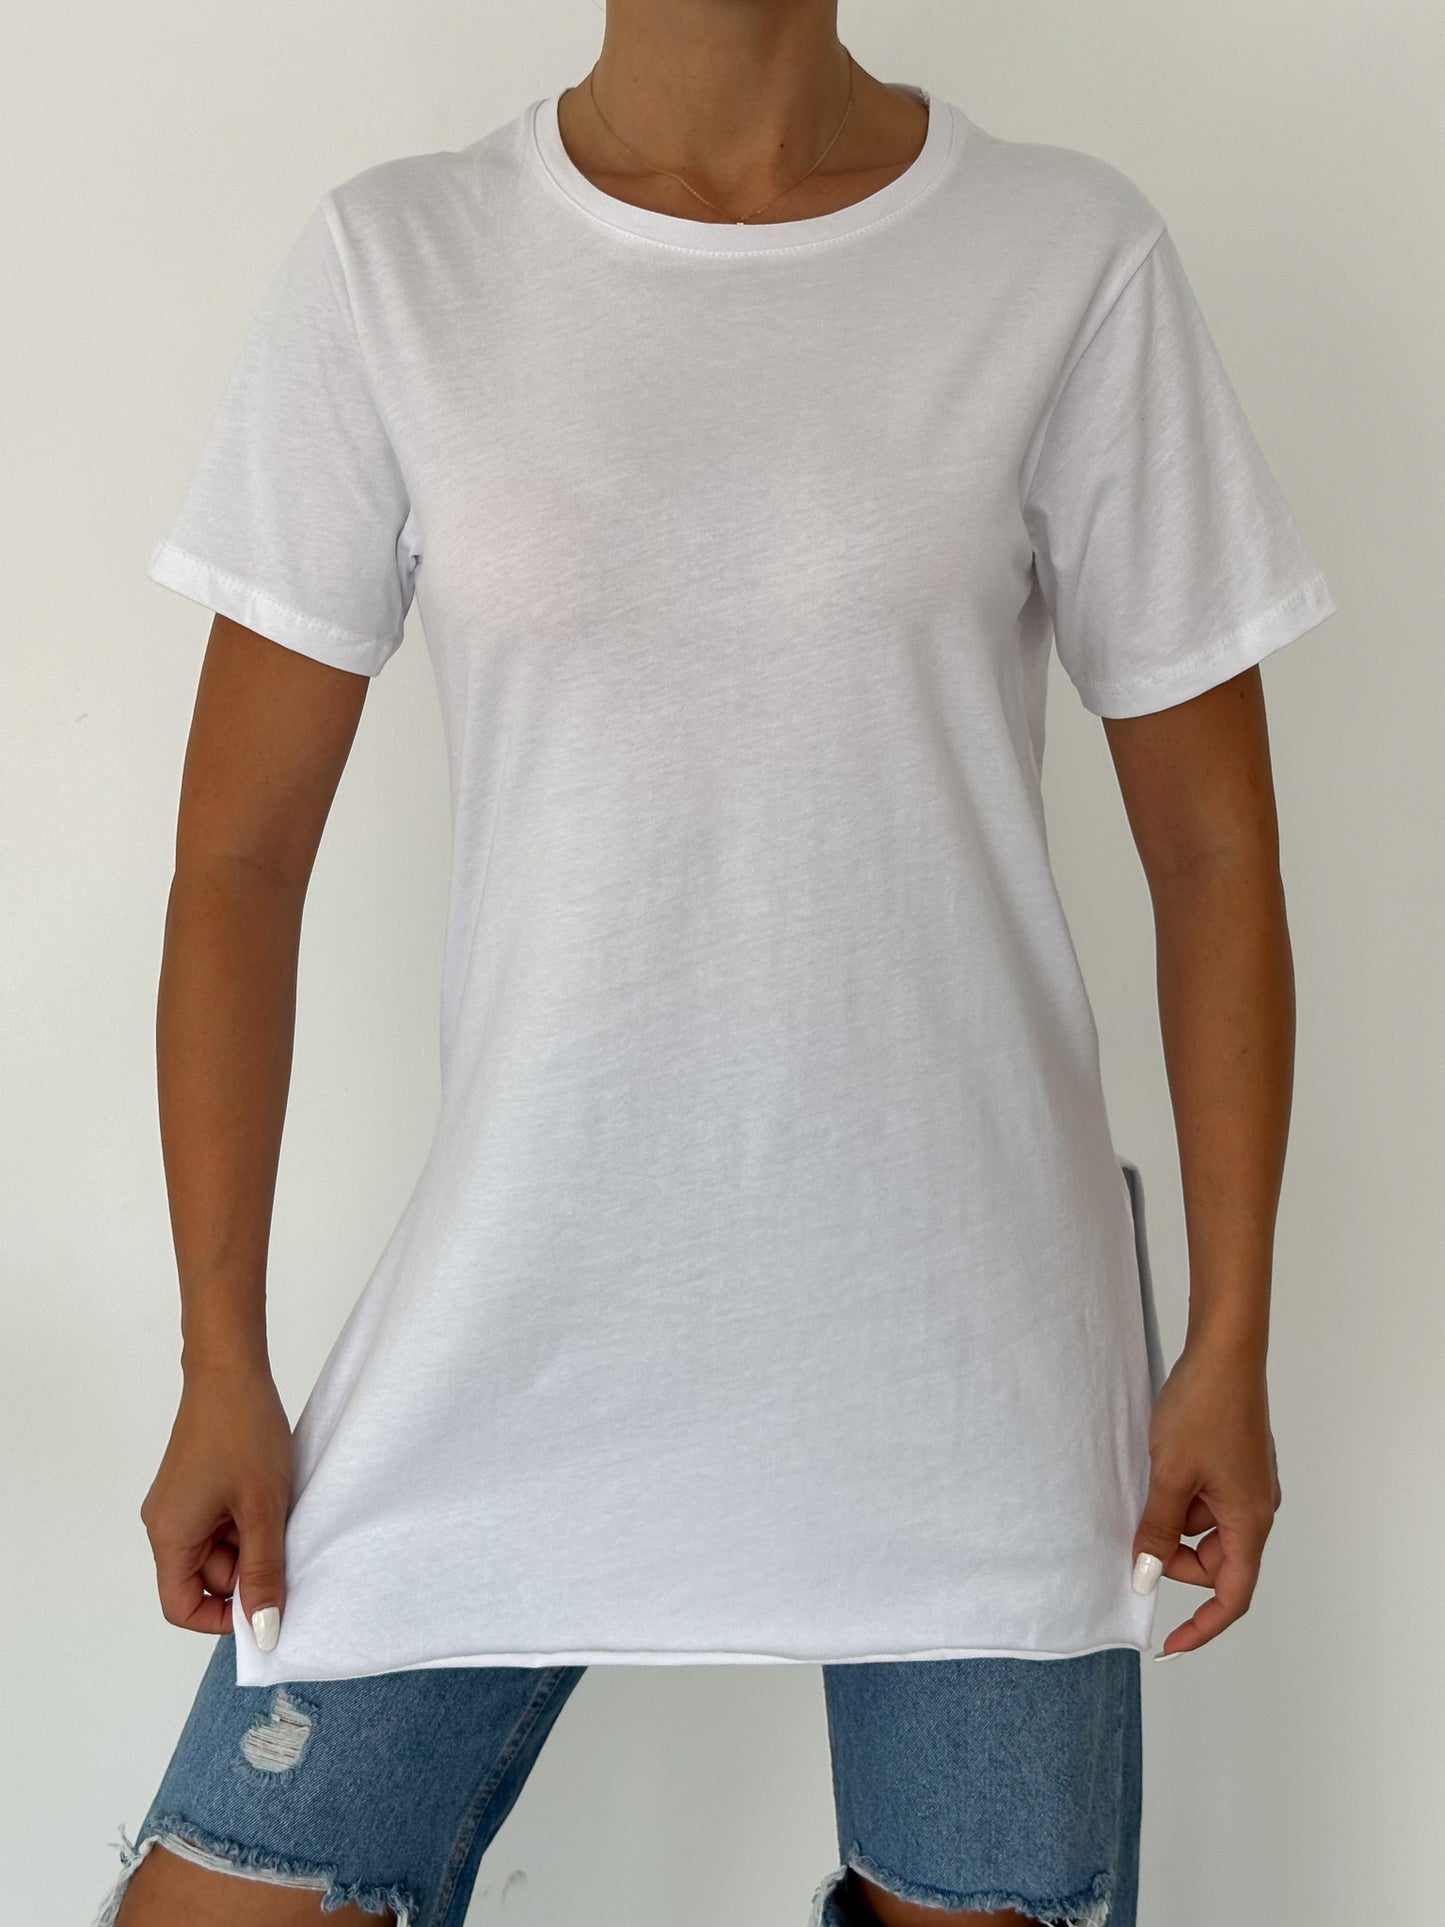 Essential Comfort: The Ultimate Best-Selling Tee - Round Neck